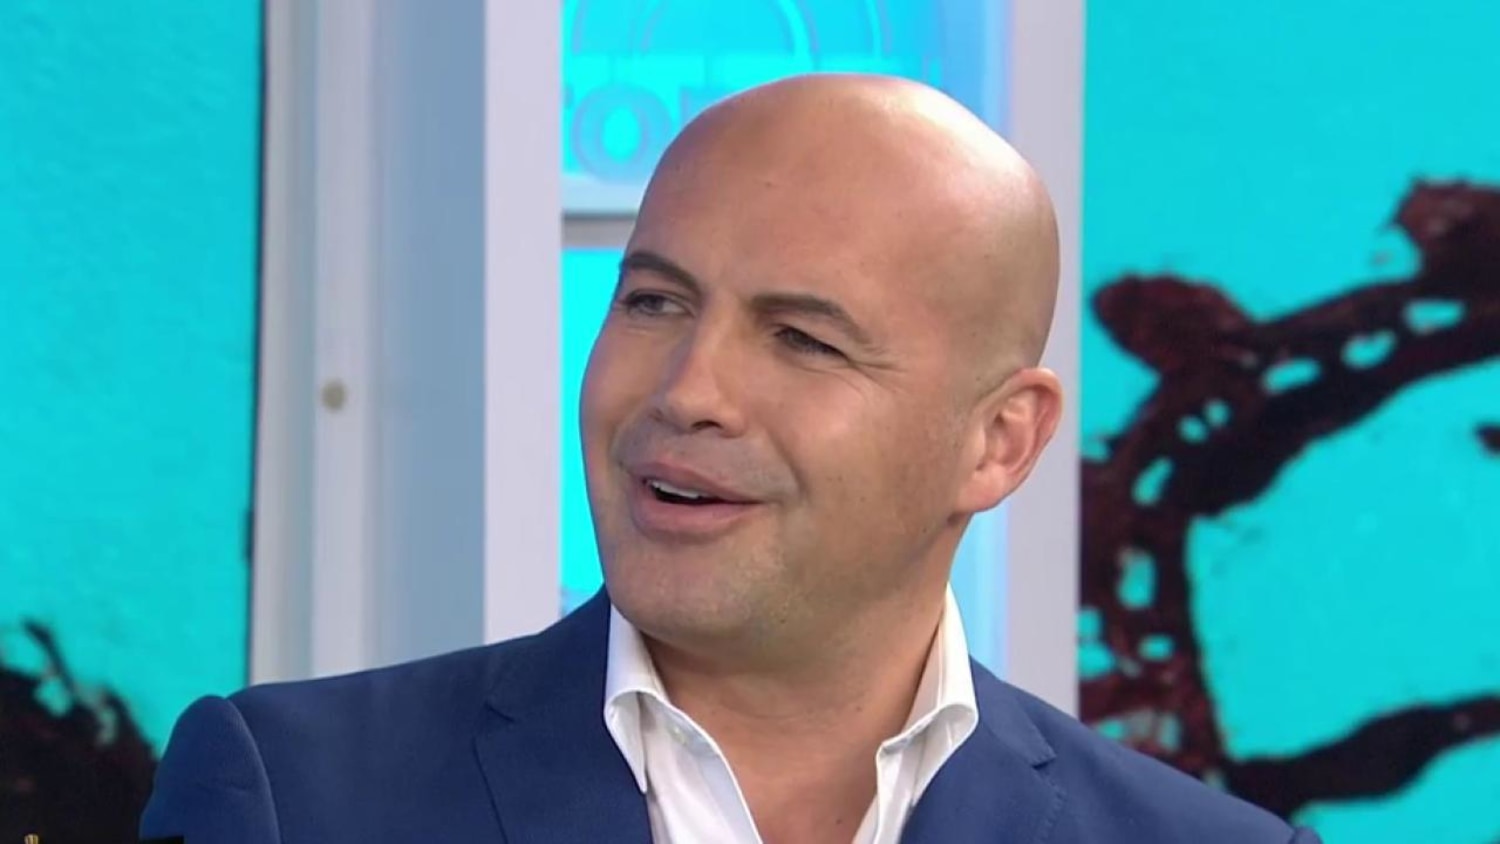 Hear Billy Zane stick up for the snooty villain he played in 'Titanic'